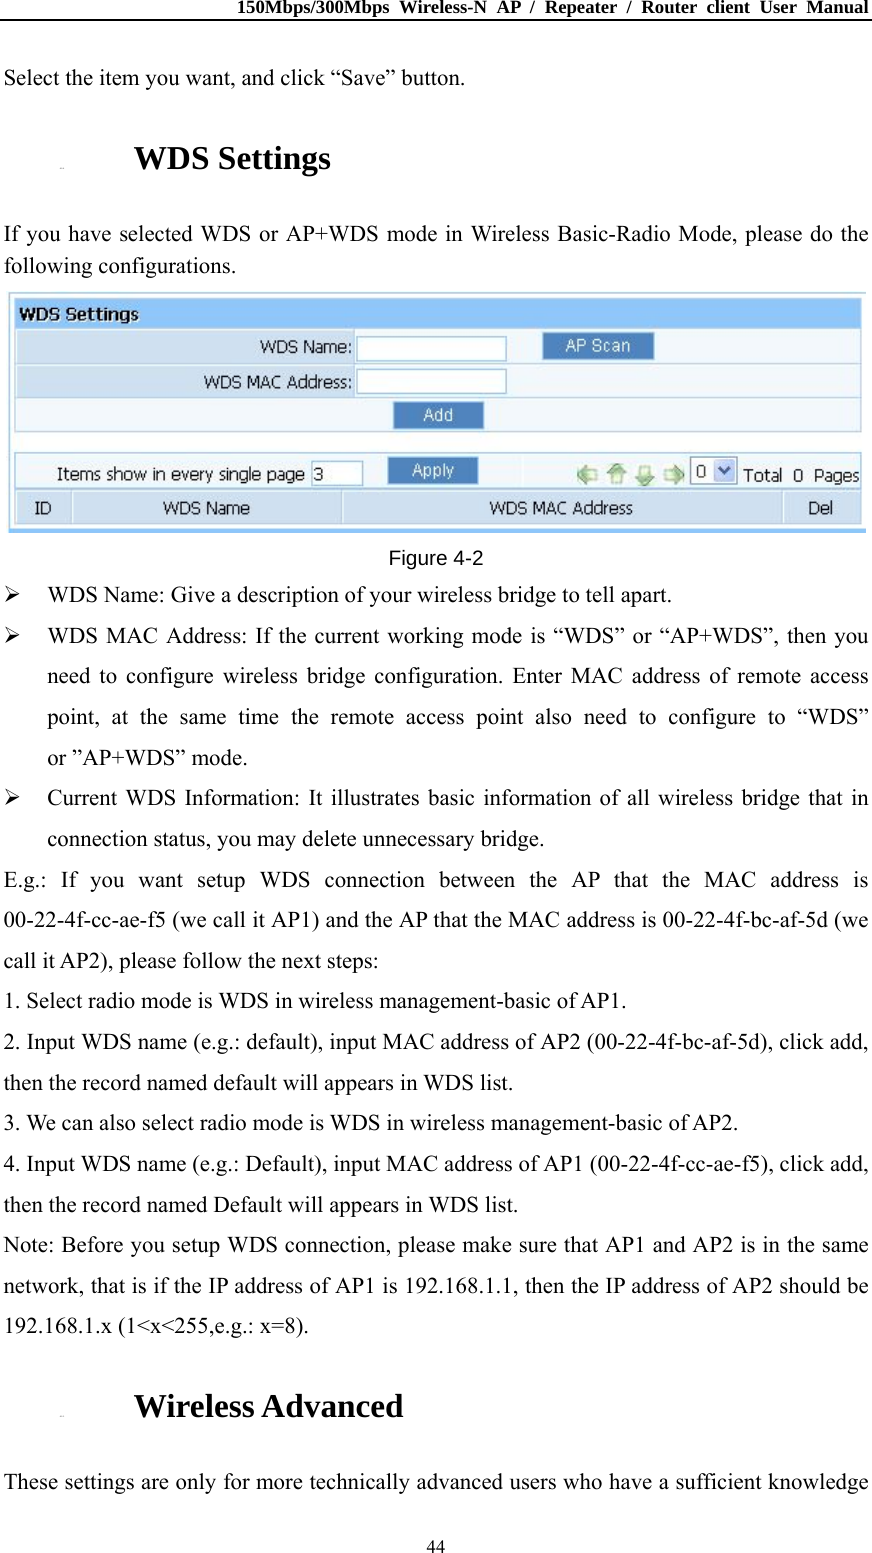 150Mbps/300Mbps Wireless-N AP / Repeater / Router client User Manual  44Select the item you want, and click “Save” button. 4.5.4. WDS Settings If you have selected WDS or AP+WDS mode in Wireless Basic-Radio Mode, please do the following configurations.  Figure 4-2  WDS Name: Give a description of your wireless bridge to tell apart.  WDS MAC Address: If the current working mode is “WDS” or “AP+WDS”, then you need to configure wireless bridge configuration. Enter MAC address of remote access point, at the same time the remote access point also need to configure to “WDS” or ”AP+WDS” mode.  Current WDS Information: It illustrates basic information of all wireless bridge that in connection status, you may delete unnecessary bridge. E.g.: If you want setup WDS connection between the AP that the MAC address is 00-22-4f-cc-ae-f5 (we call it AP1) and the AP that the MAC address is 00-22-4f-bc-af-5d (we call it AP2), please follow the next steps: 1. Select radio mode is WDS in wireless management-basic of AP1. 2. Input WDS name (e.g.: default), input MAC address of AP2 (00-22-4f-bc-af-5d), click add, then the record named default will appears in WDS list. 3. We can also select radio mode is WDS in wireless management-basic of AP2. 4. Input WDS name (e.g.: Default), input MAC address of AP1 (00-22-4f-cc-ae-f5), click add, then the record named Default will appears in WDS list. Note: Before you setup WDS connection, please make sure that AP1 and AP2 is in the same network, that is if the IP address of AP1 is 192.168.1.1, then the IP address of AP2 should be 192.168.1.x (1&lt;x&lt;255,e.g.: x=8). 4.5.5. Wireless Advanced These settings are only for more technically advanced users who have a sufficient knowledge 